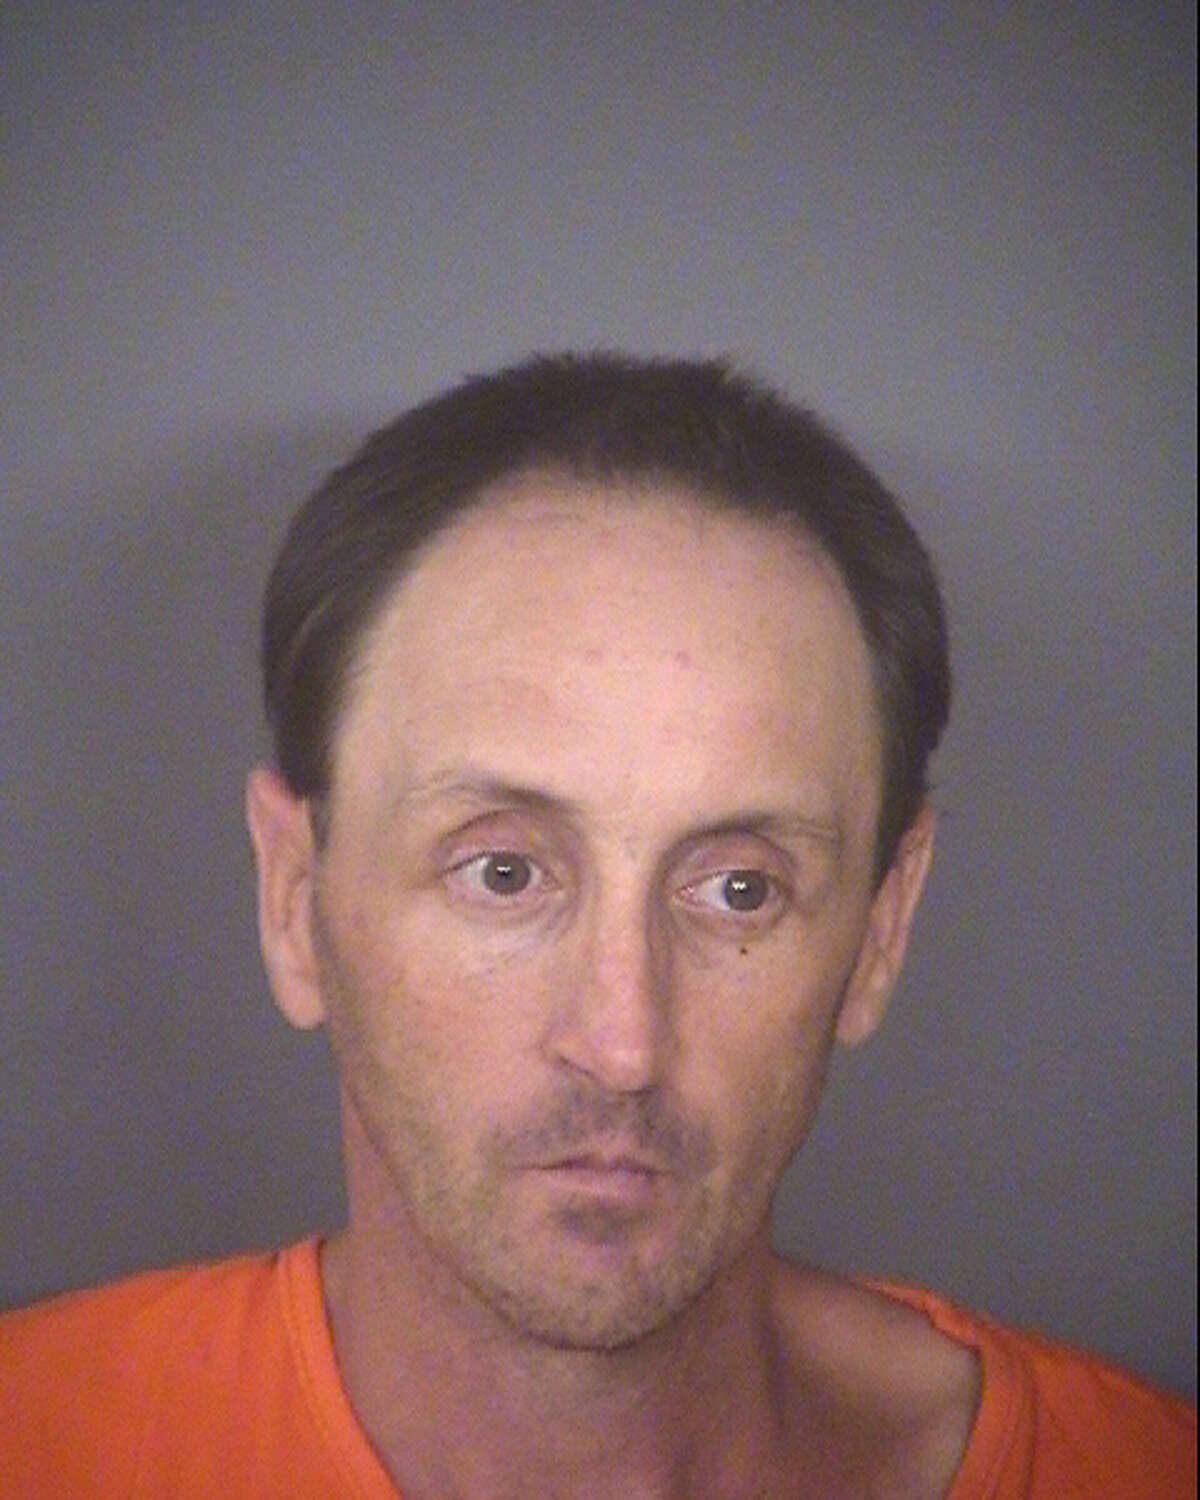 Jason Paul, 43, is charged with retaliation.